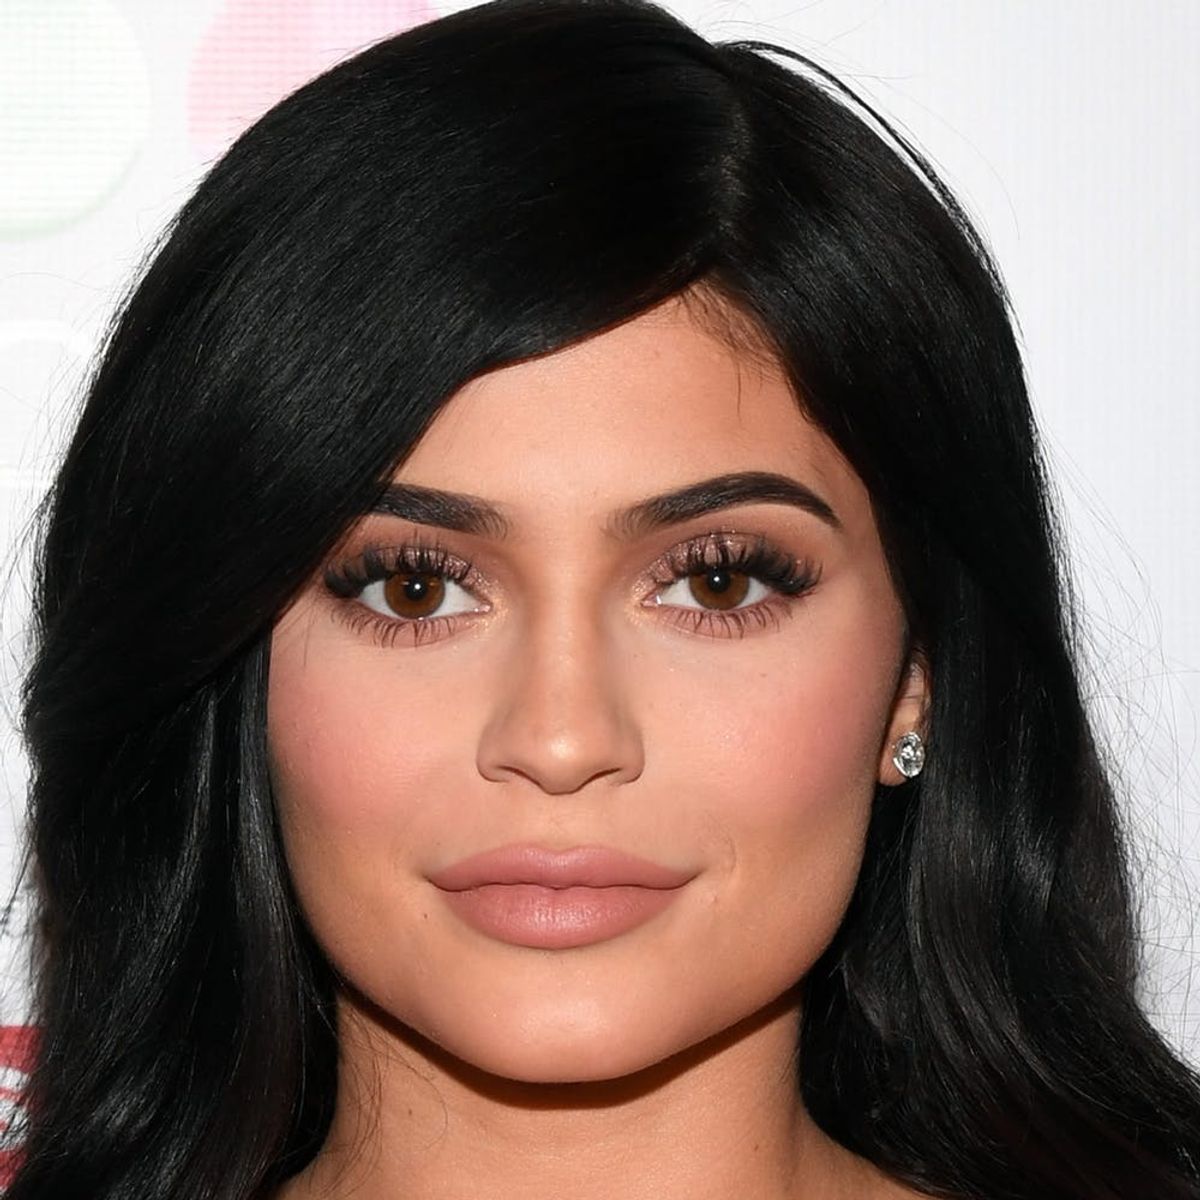 BREAKING: Kylie Jenner Has Given Birth to Her First Child!